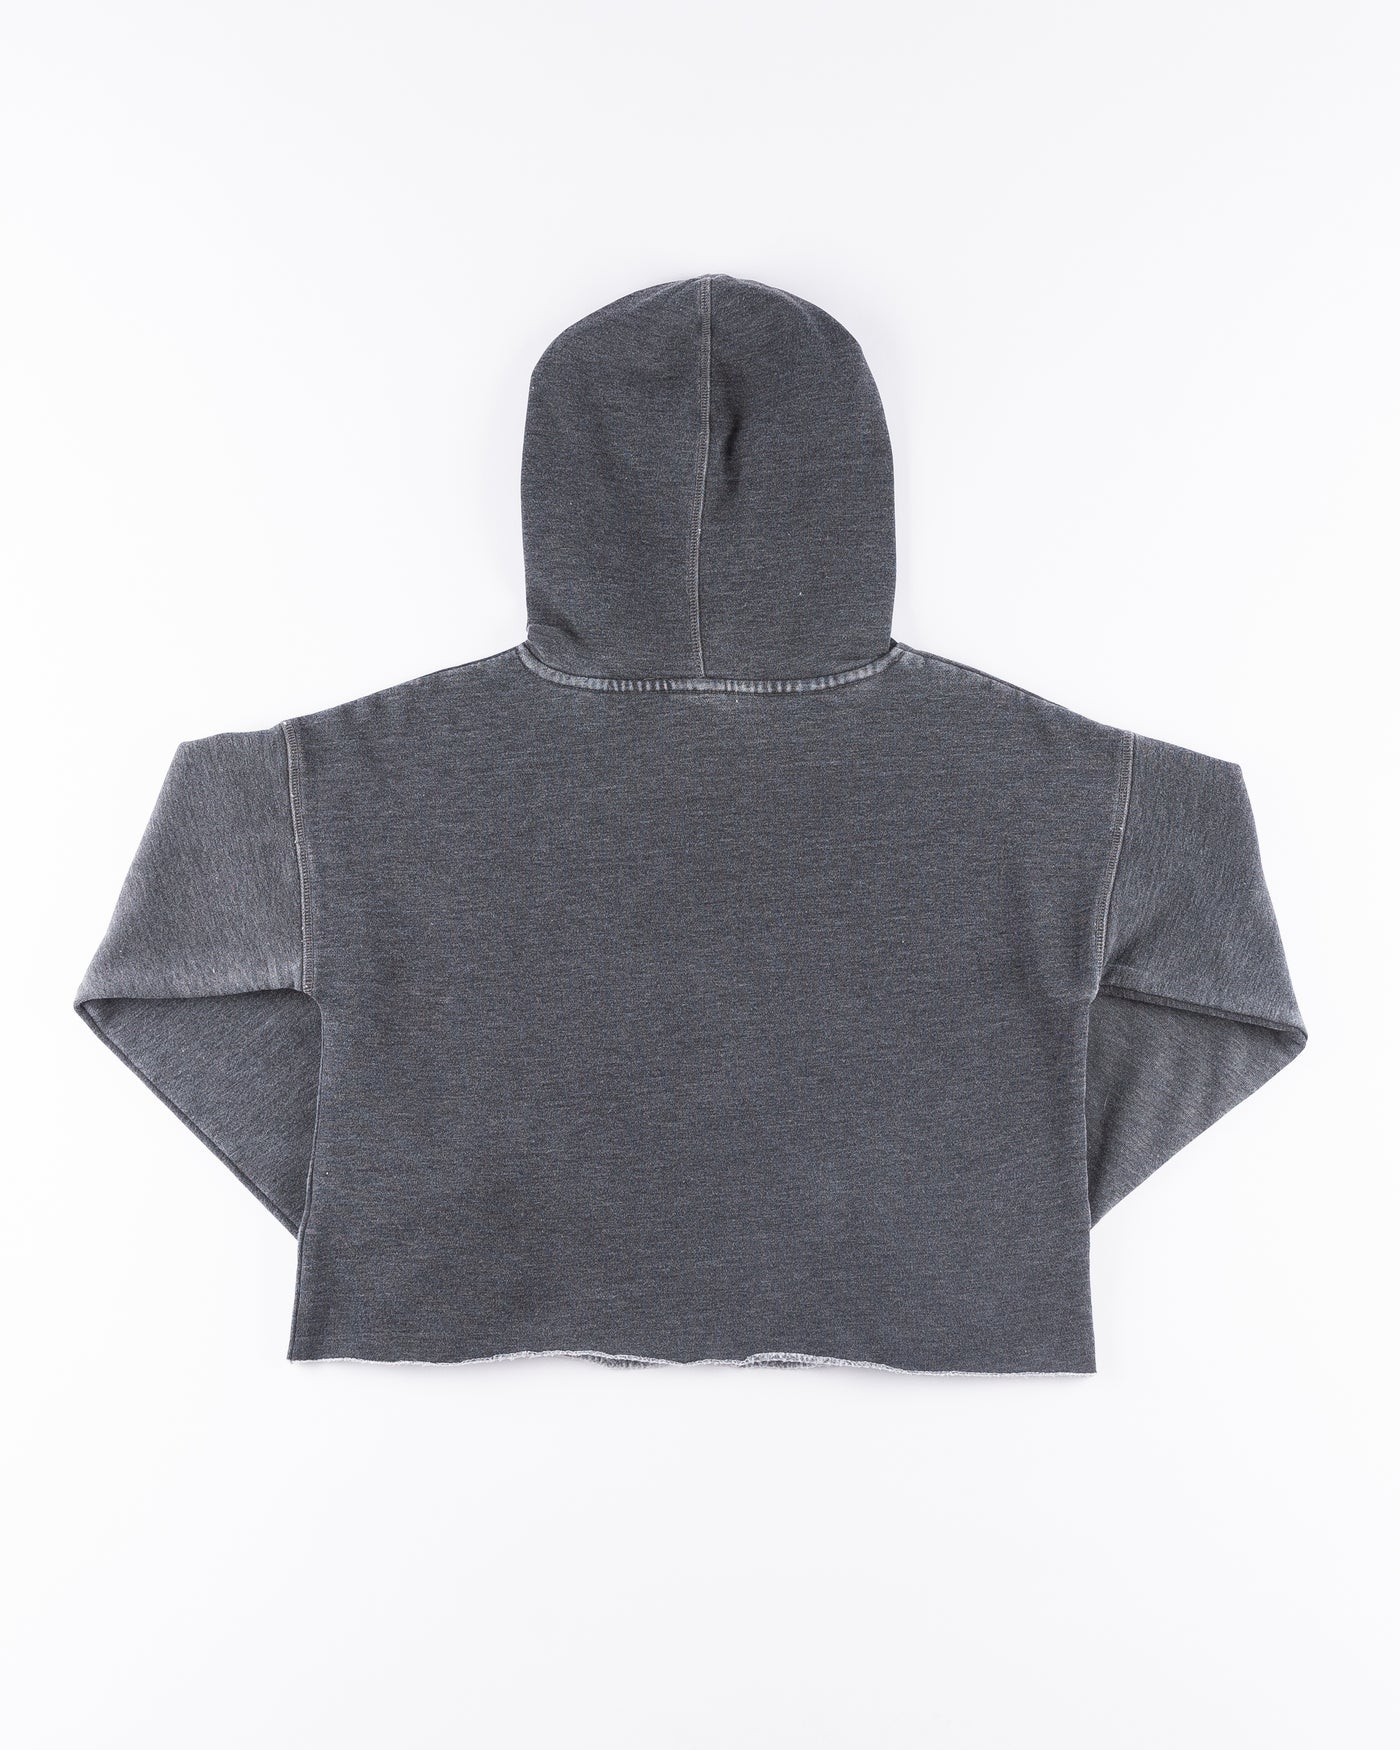 grey chicka-d cropped hoodie with Chicago Blackhawks wordmark across chest - back lay flat